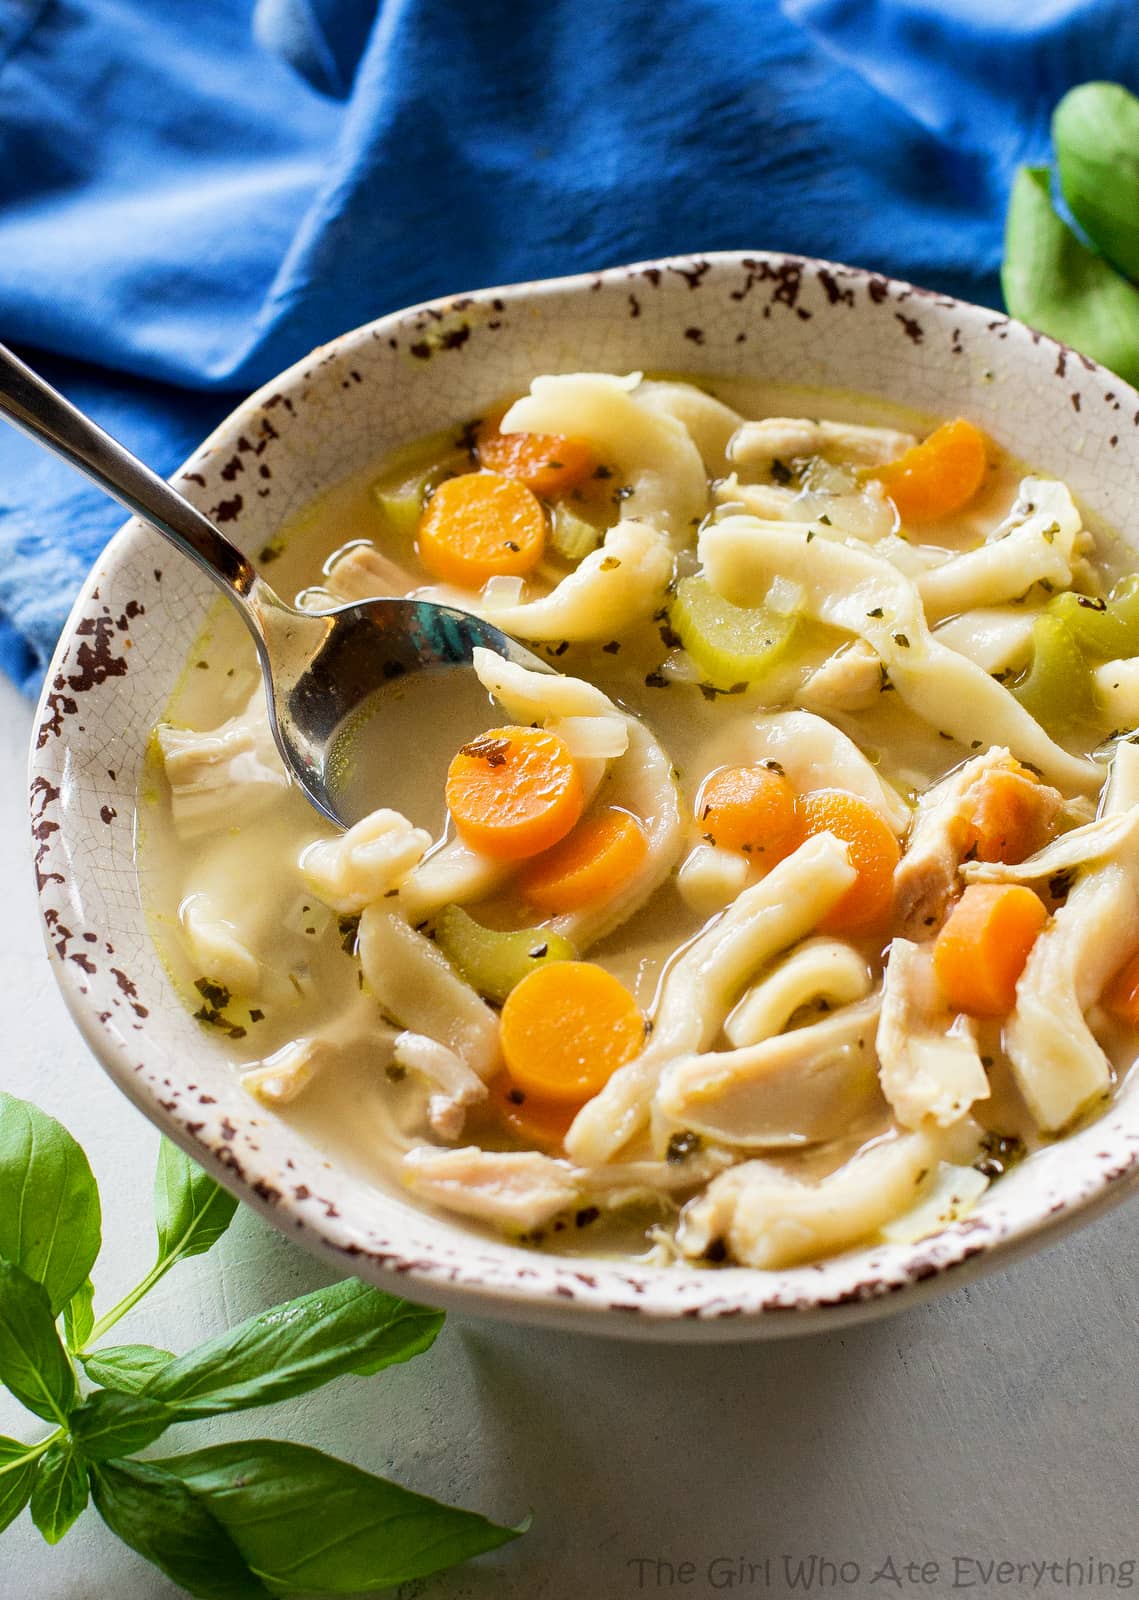 homemade chicken noodle soup - Chicken Noodle Soup